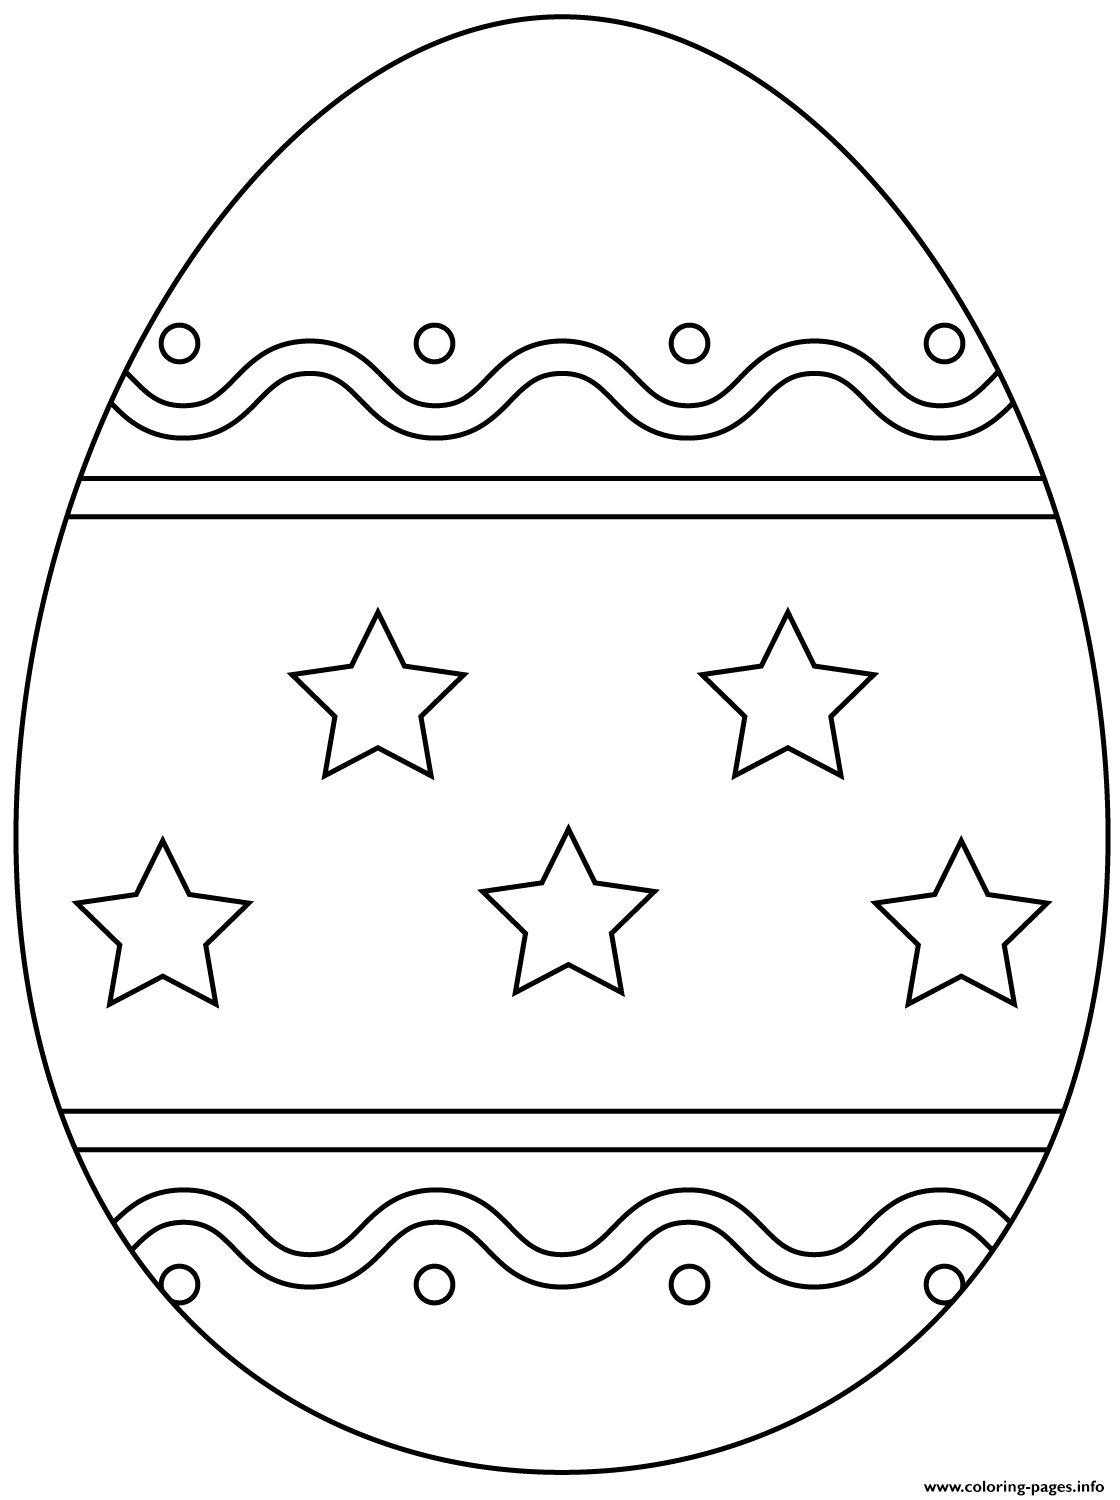 Easter Egg With Simple Pattern coloring